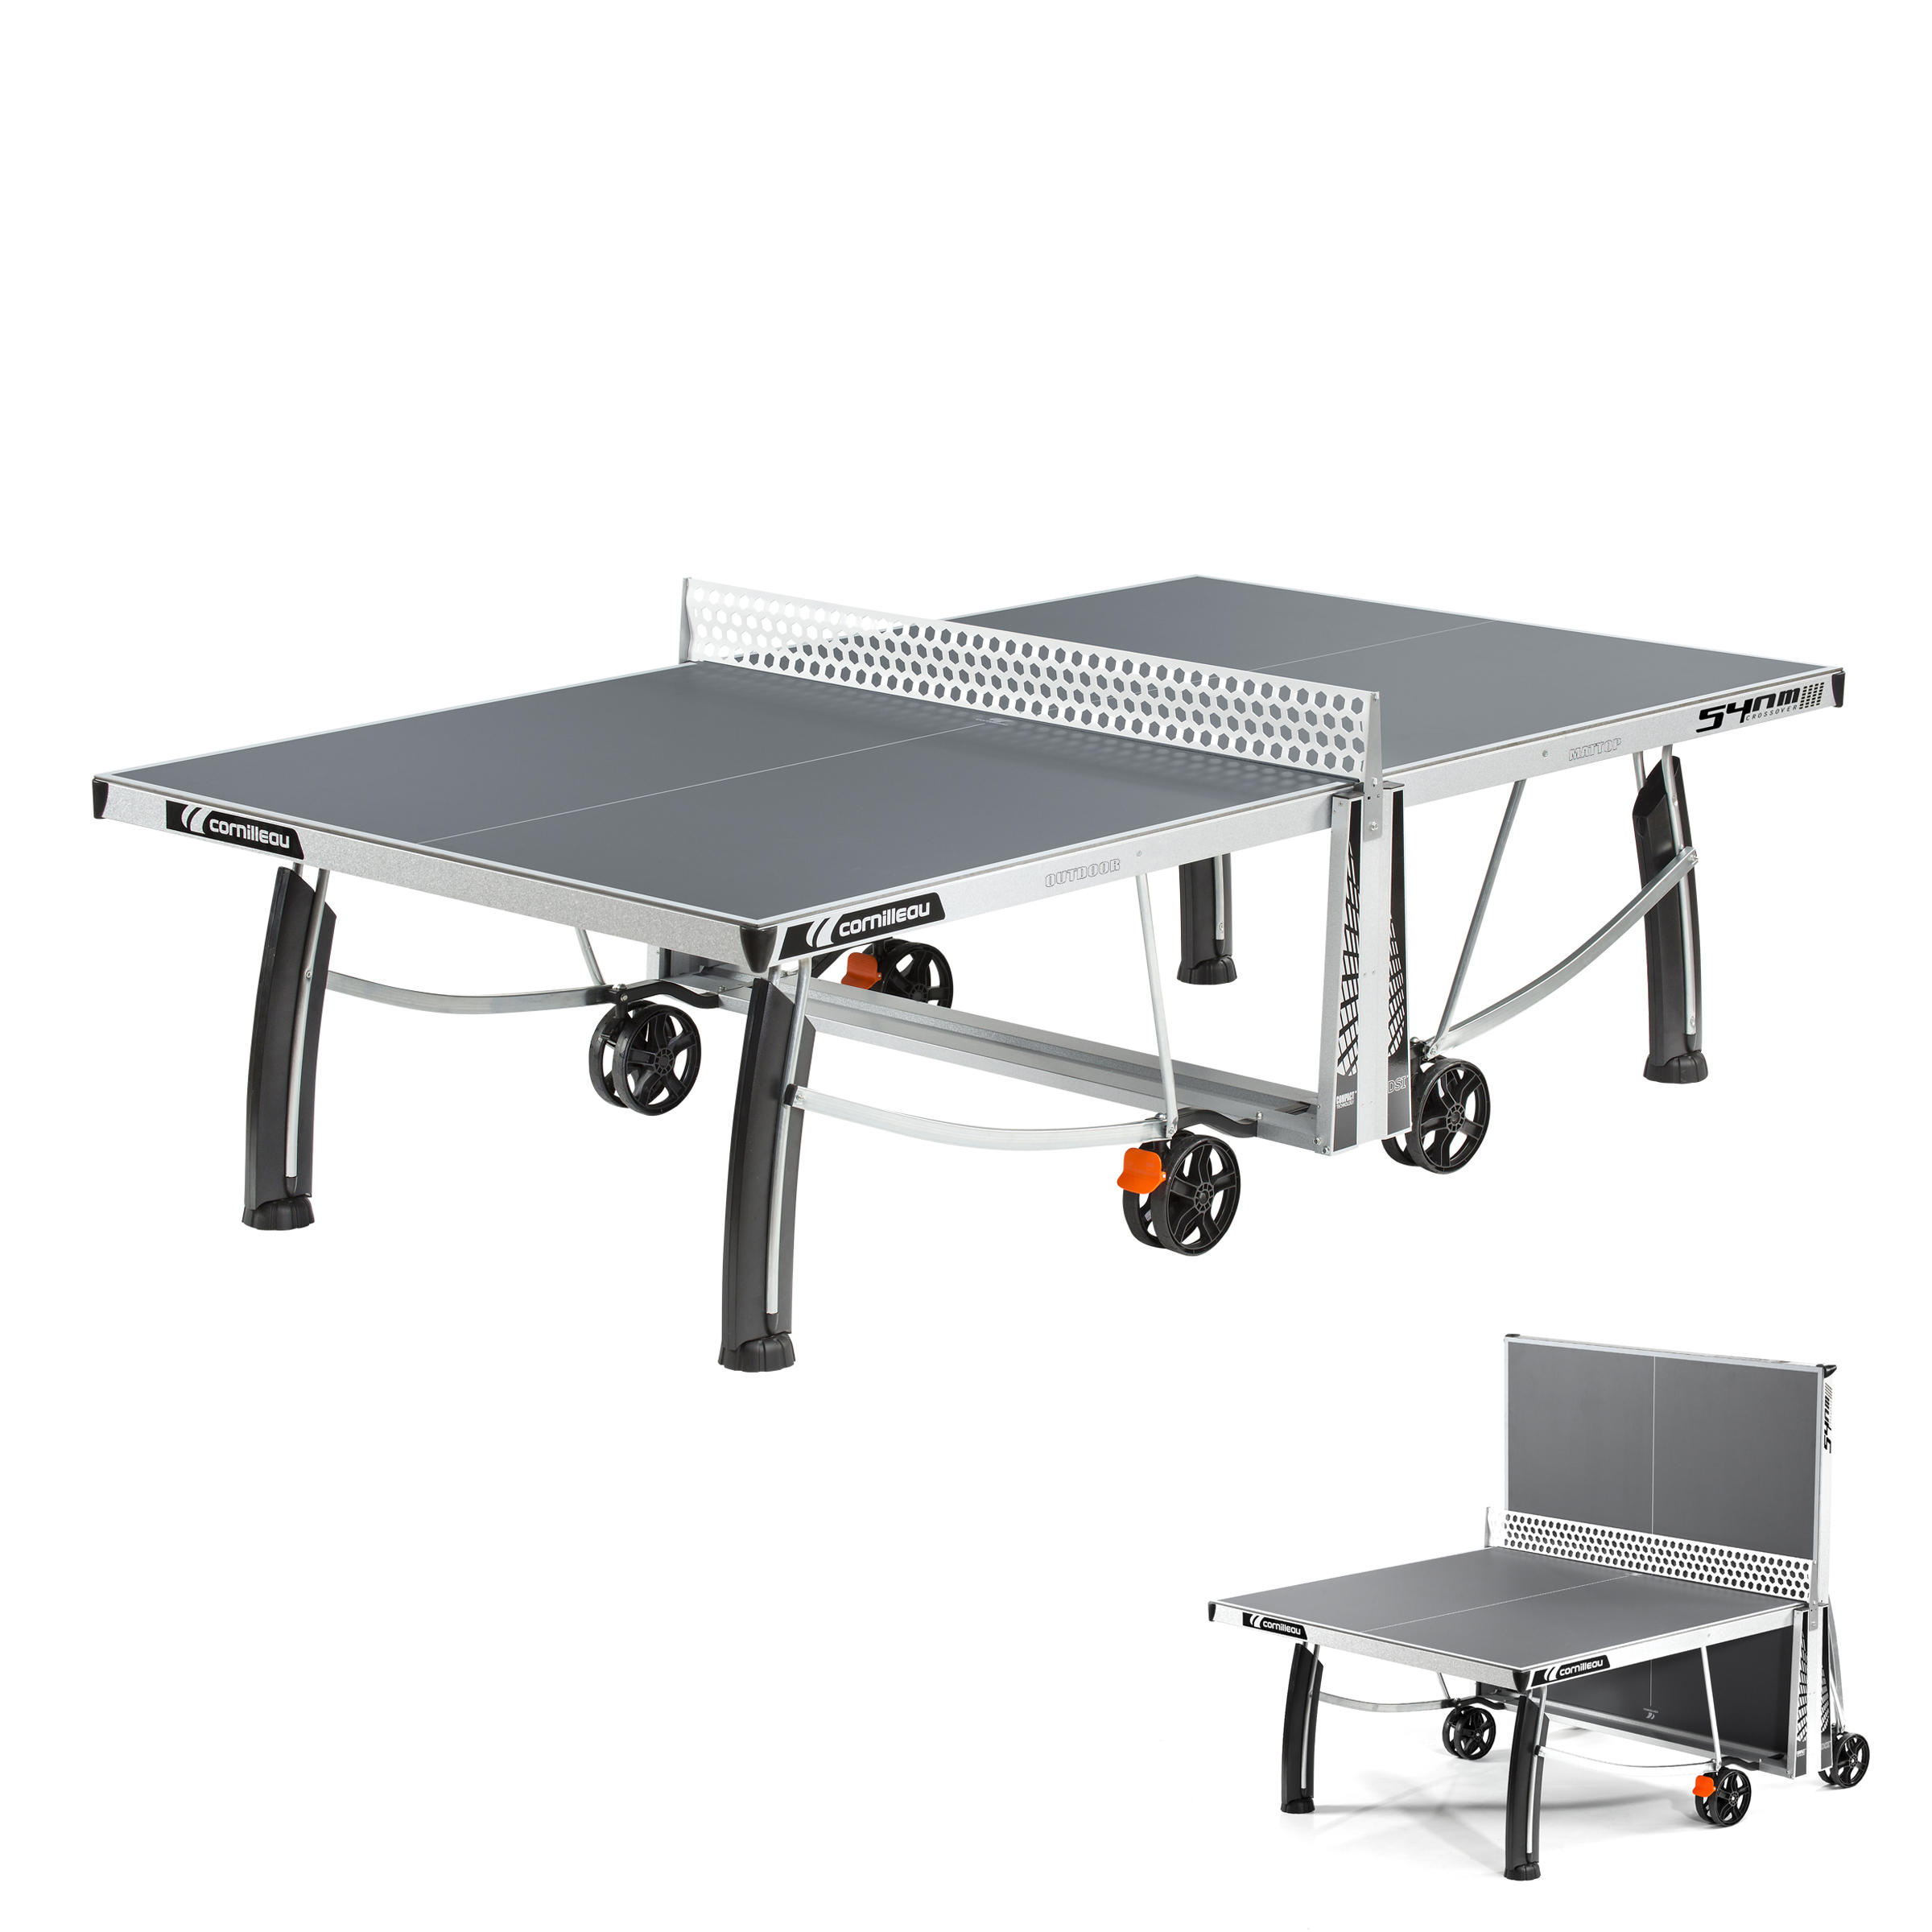 540 Pro Outdoor Table Tennis Table 